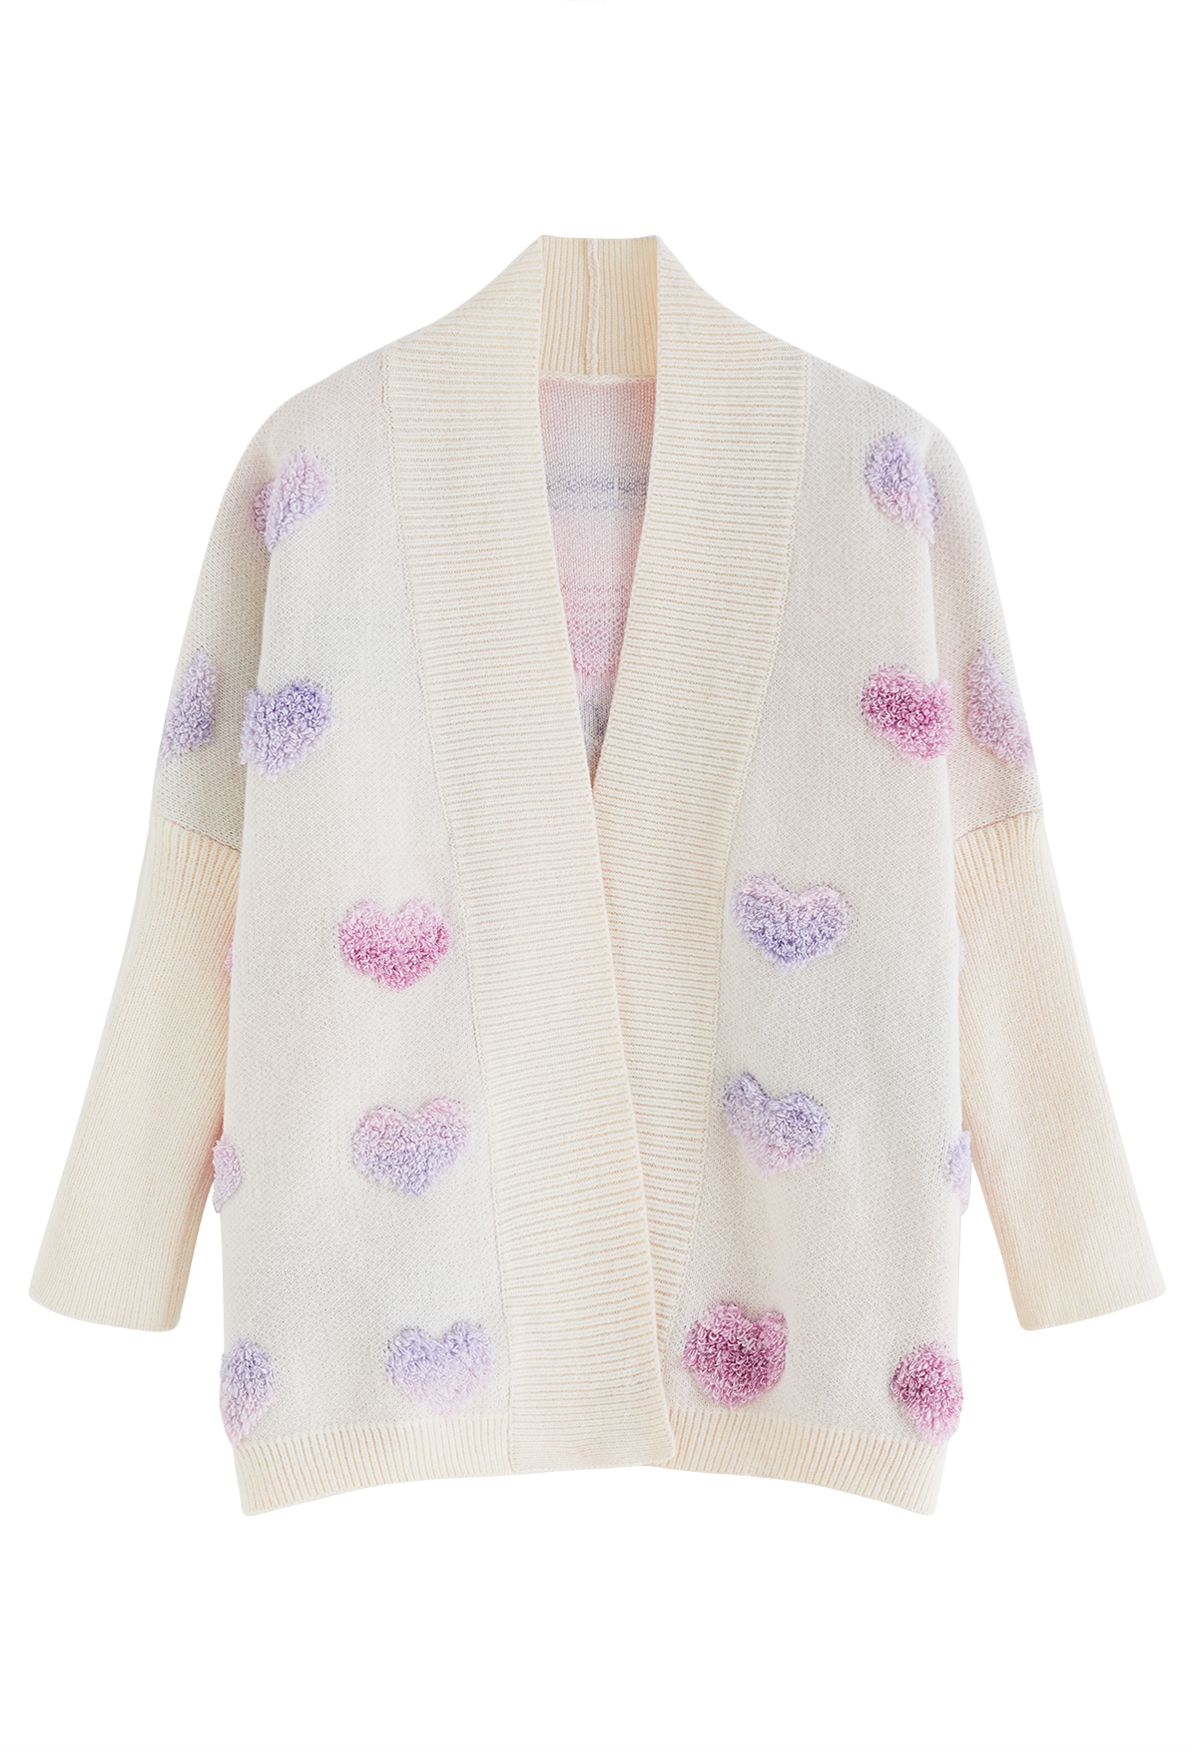 Ombre Heart Embossed Batwing Sleeve Knit Cardigan